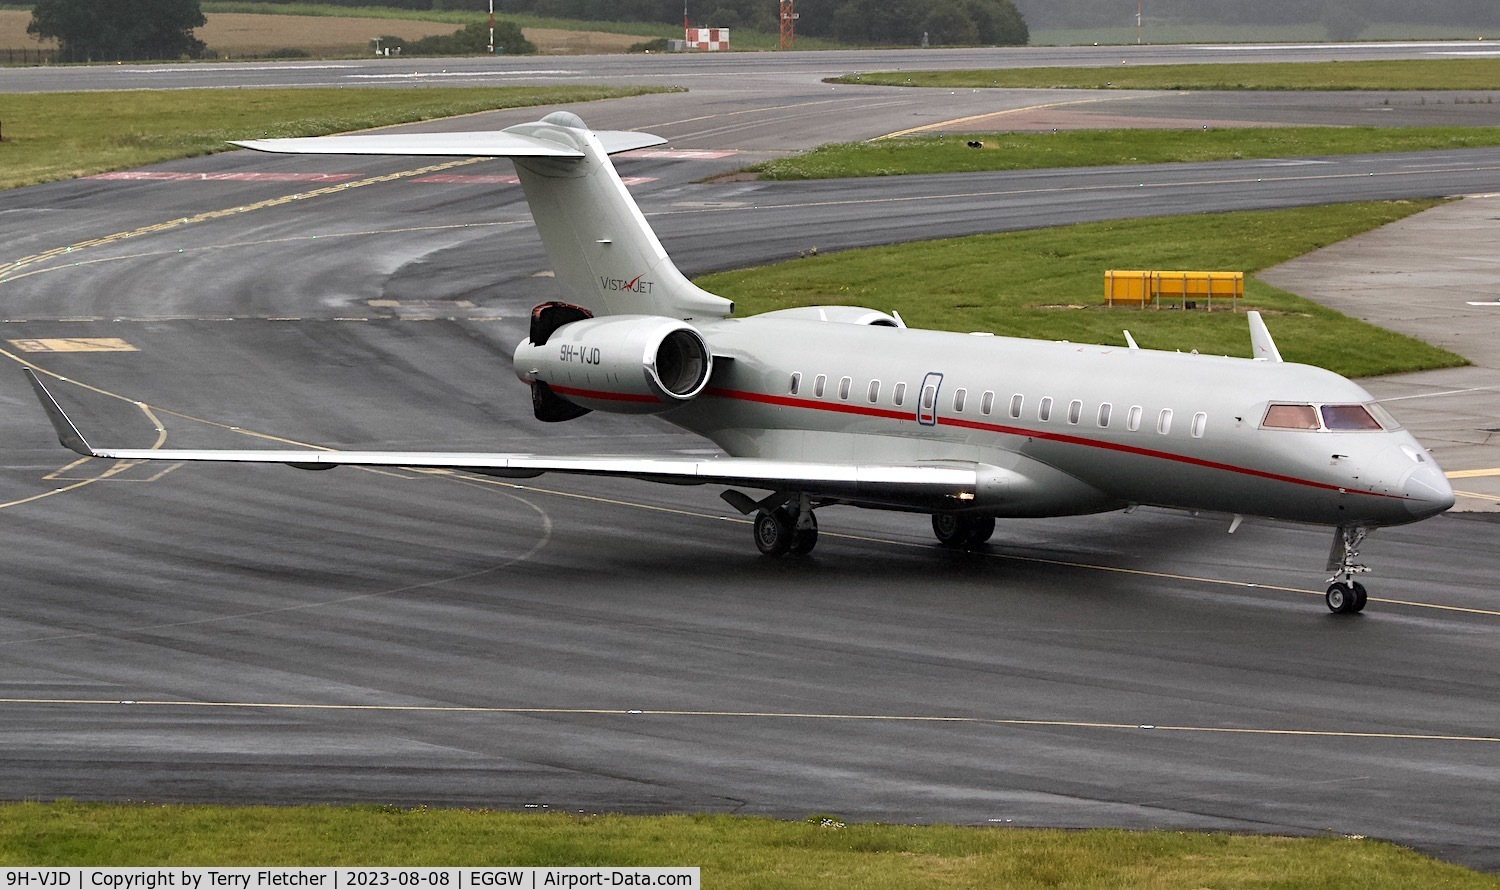 9H-VJD, 2011 Bombardier BD-700-1A10 Global 6000 C/N 9472, At Luton Airport